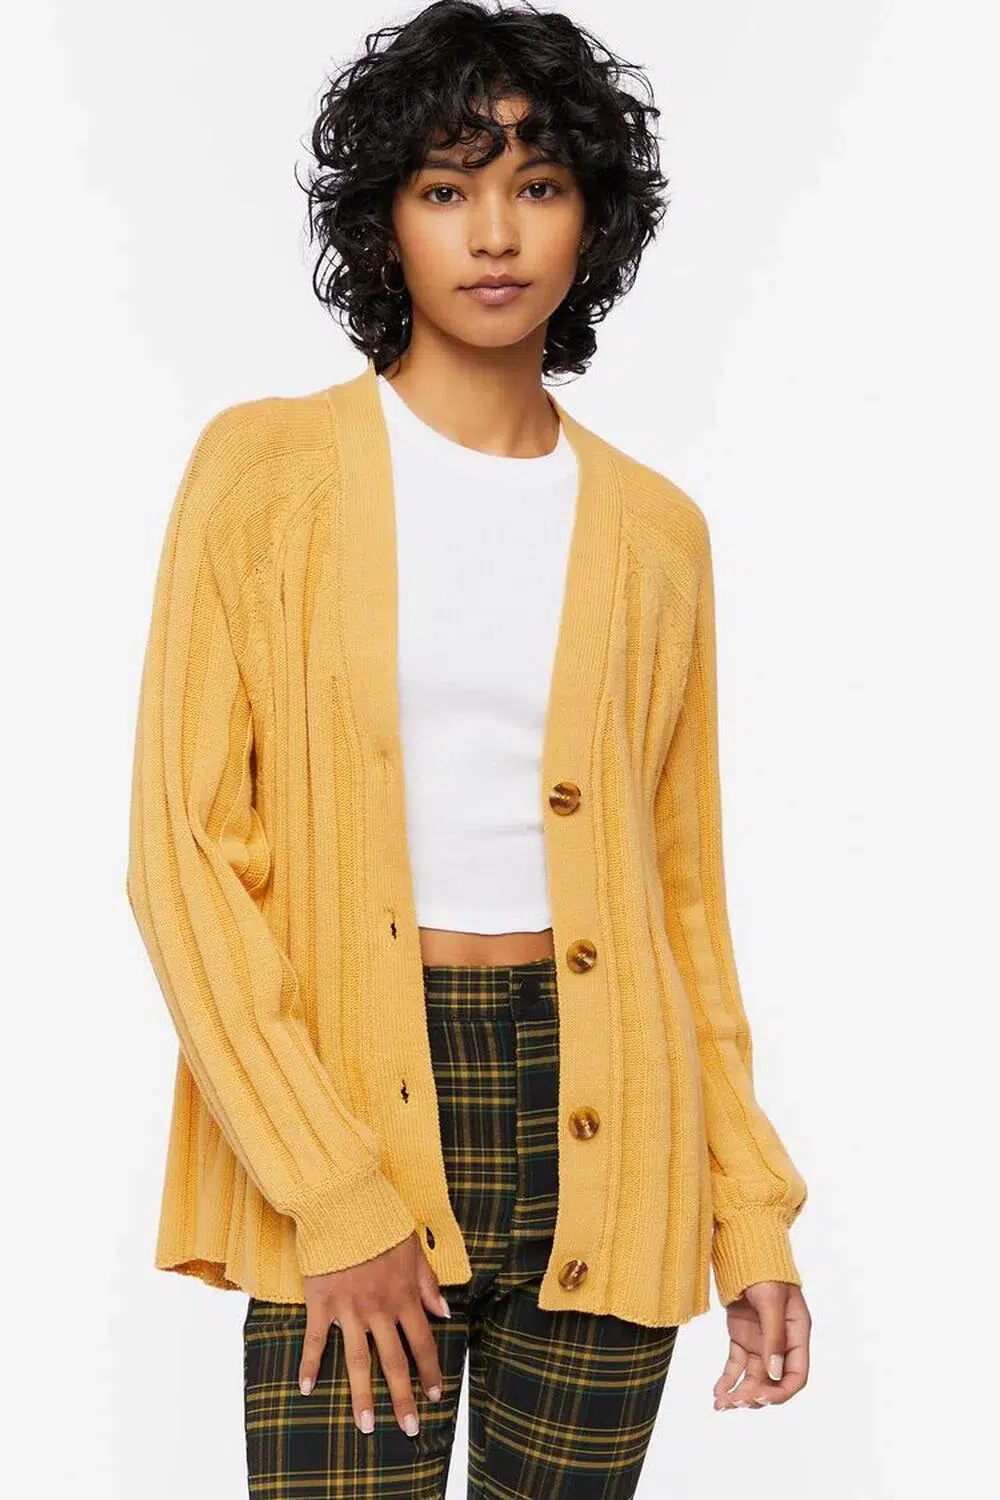 5. Forever 21 Ribbed Cardigan Sweater